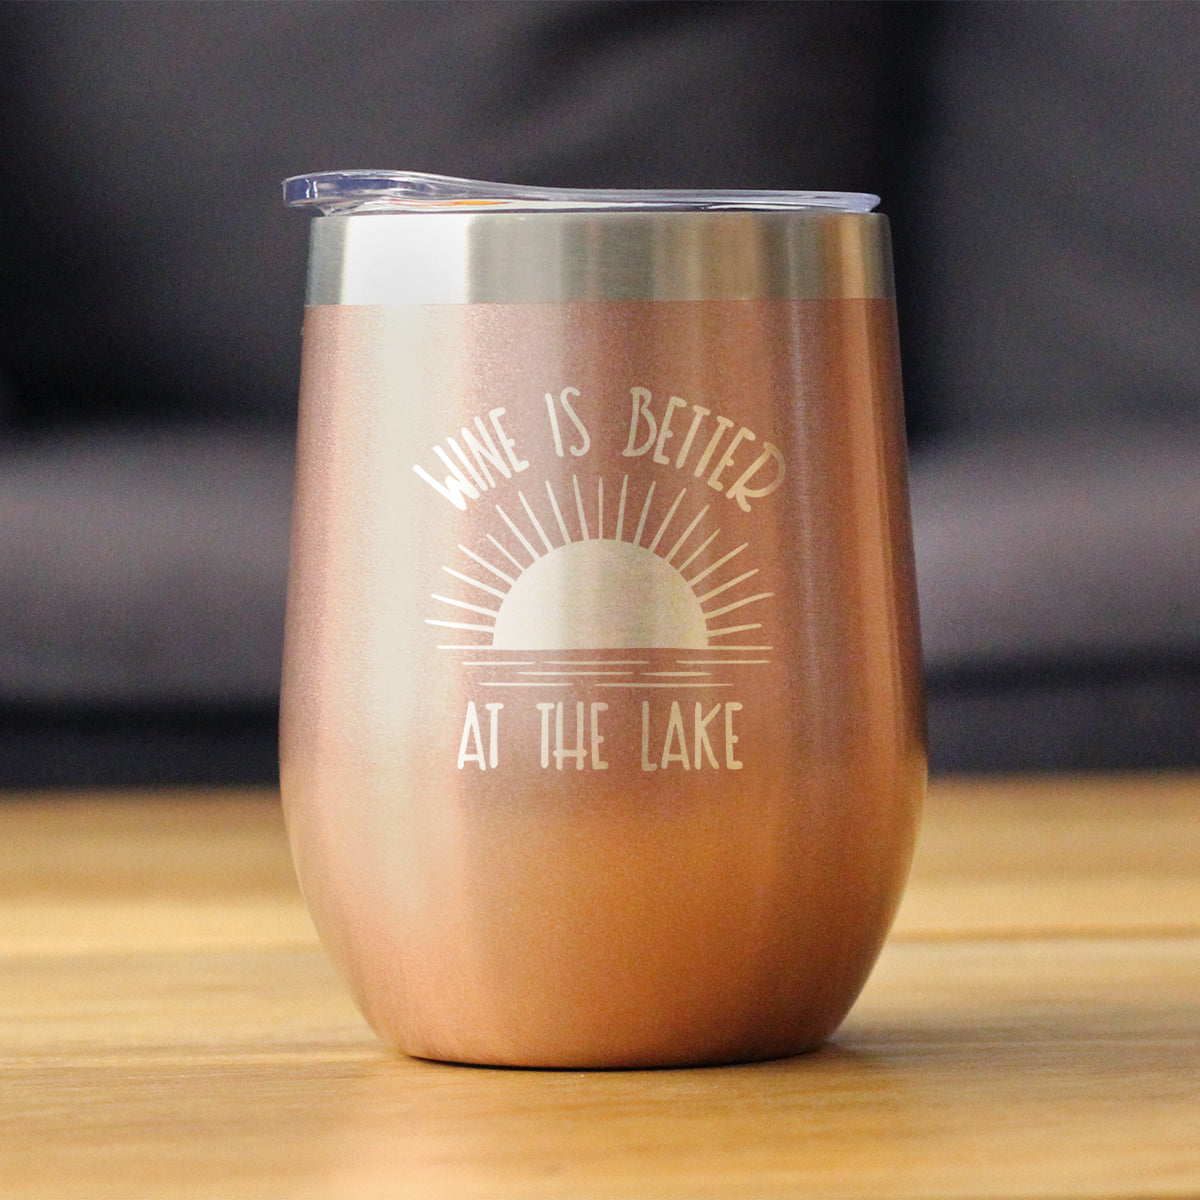 Wine is Better at the Lake - Wine Tumbler Glass with Sliding Lid - Stainless Steel Insulated Mug - Fun Lake House Themed Decor